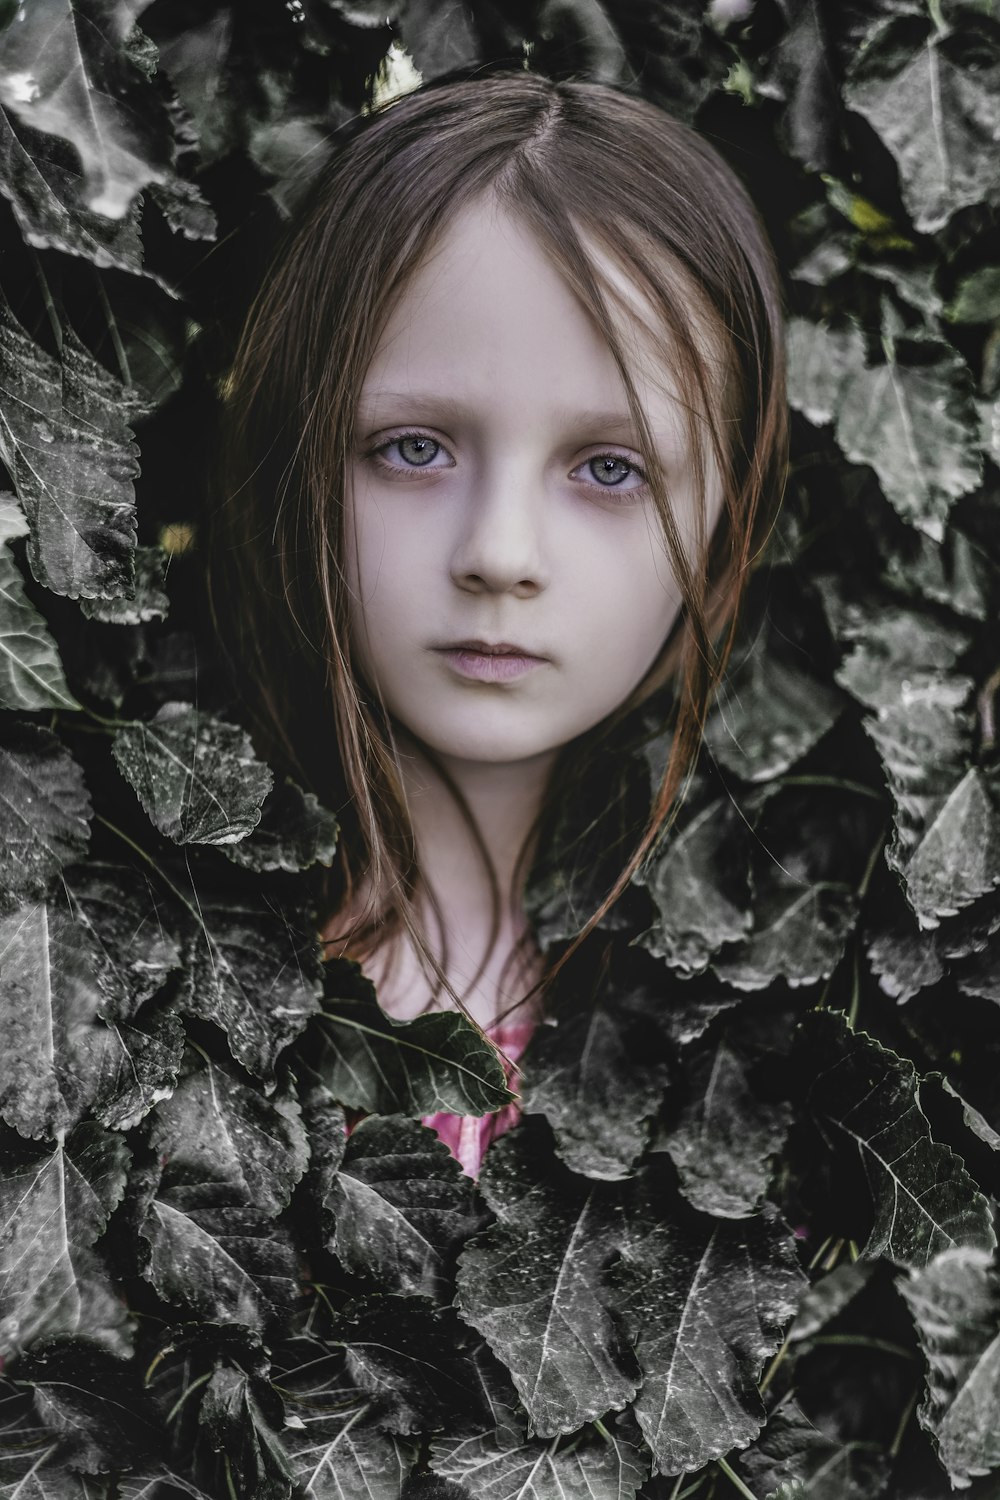 a young girl with blue eyes is surrounded by leaves